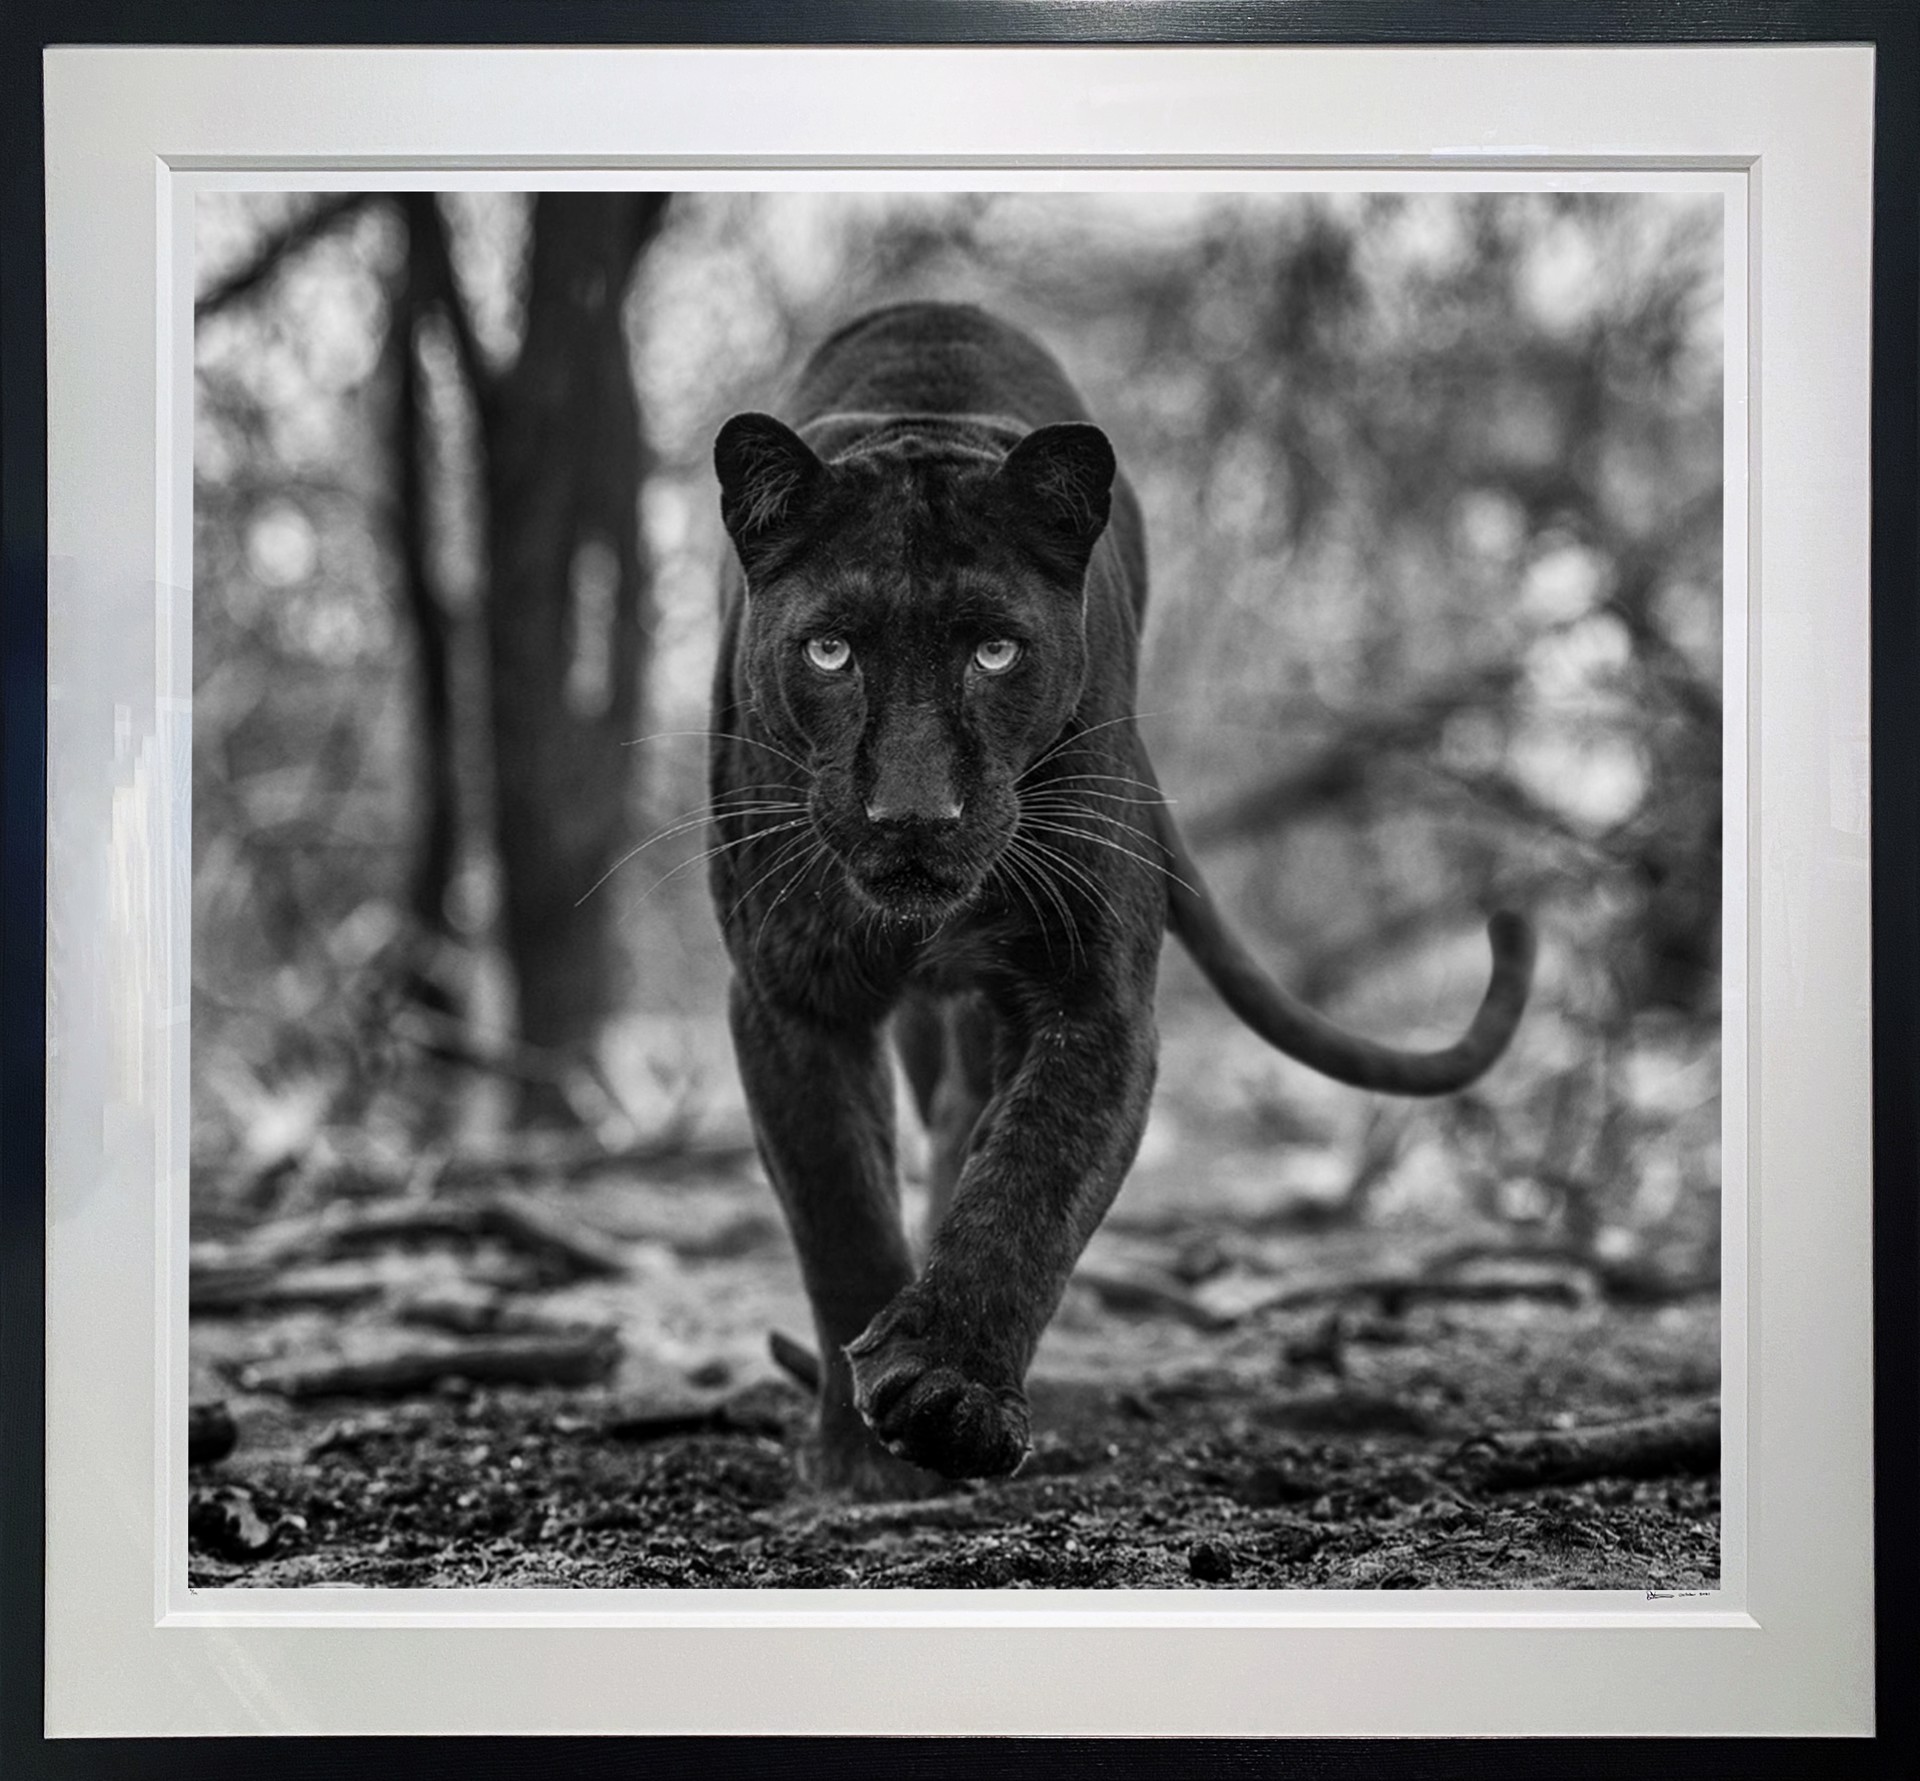 Remains of the Day by David Yarrow